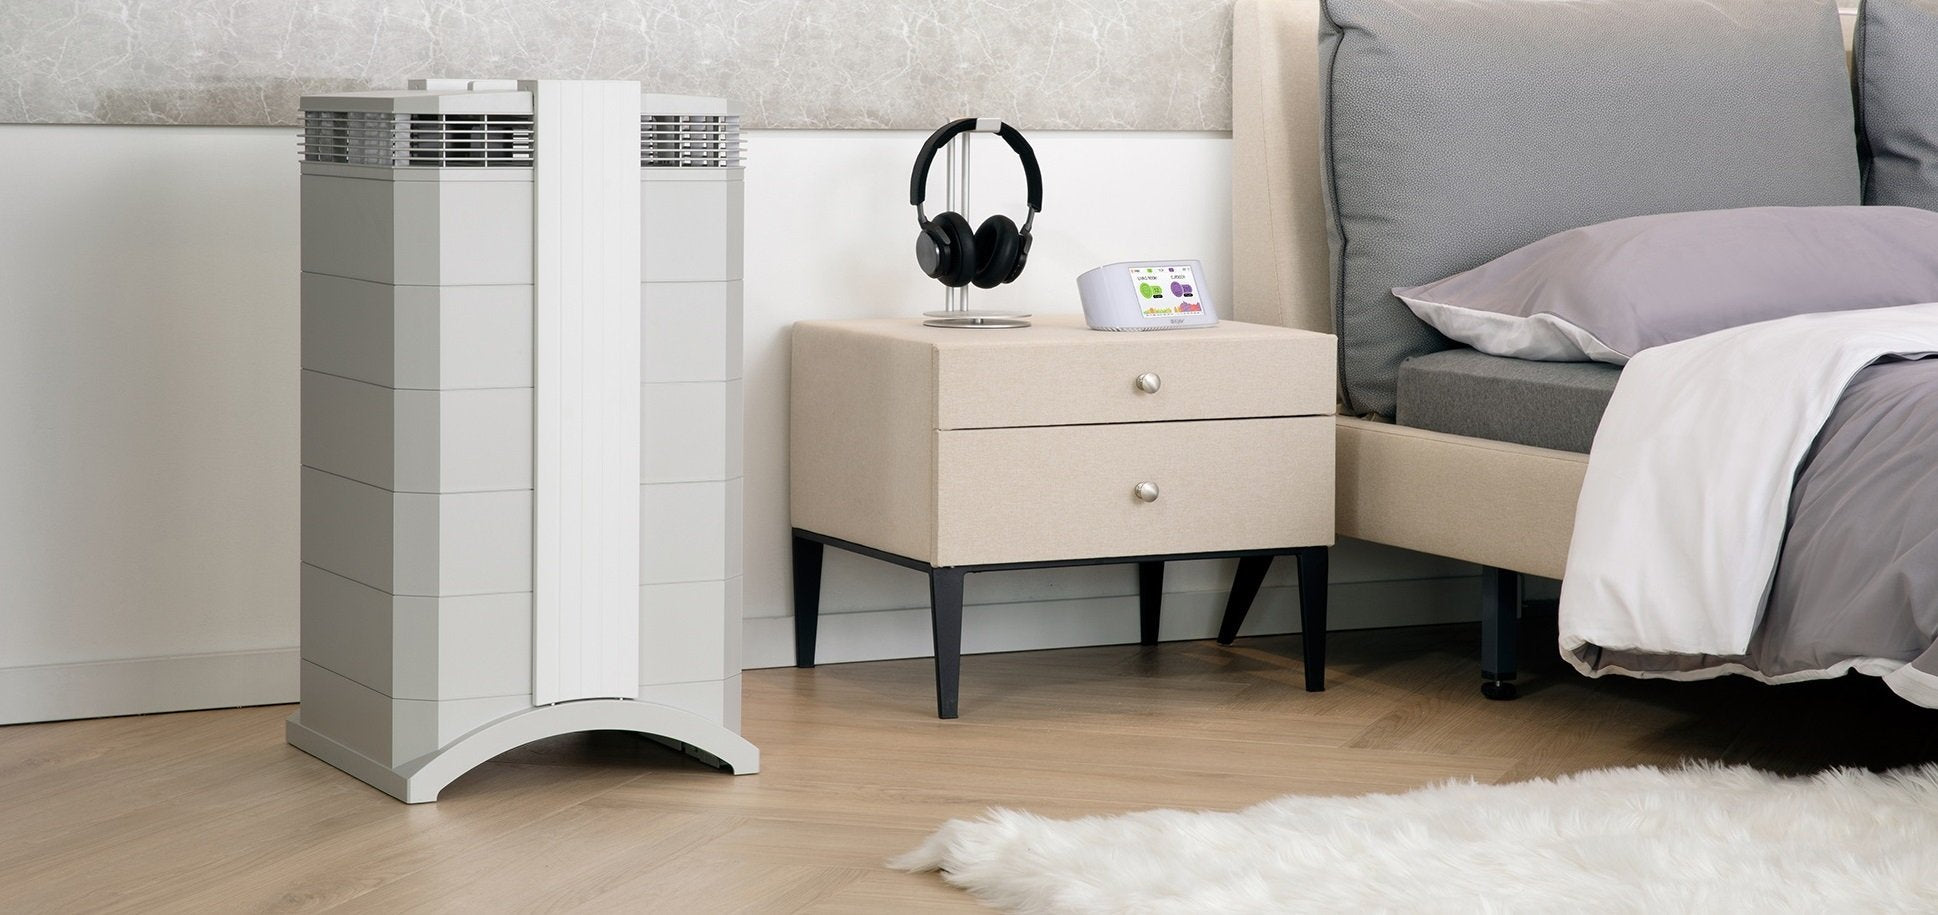 IQAir Air Purifiers & Replacement Filters